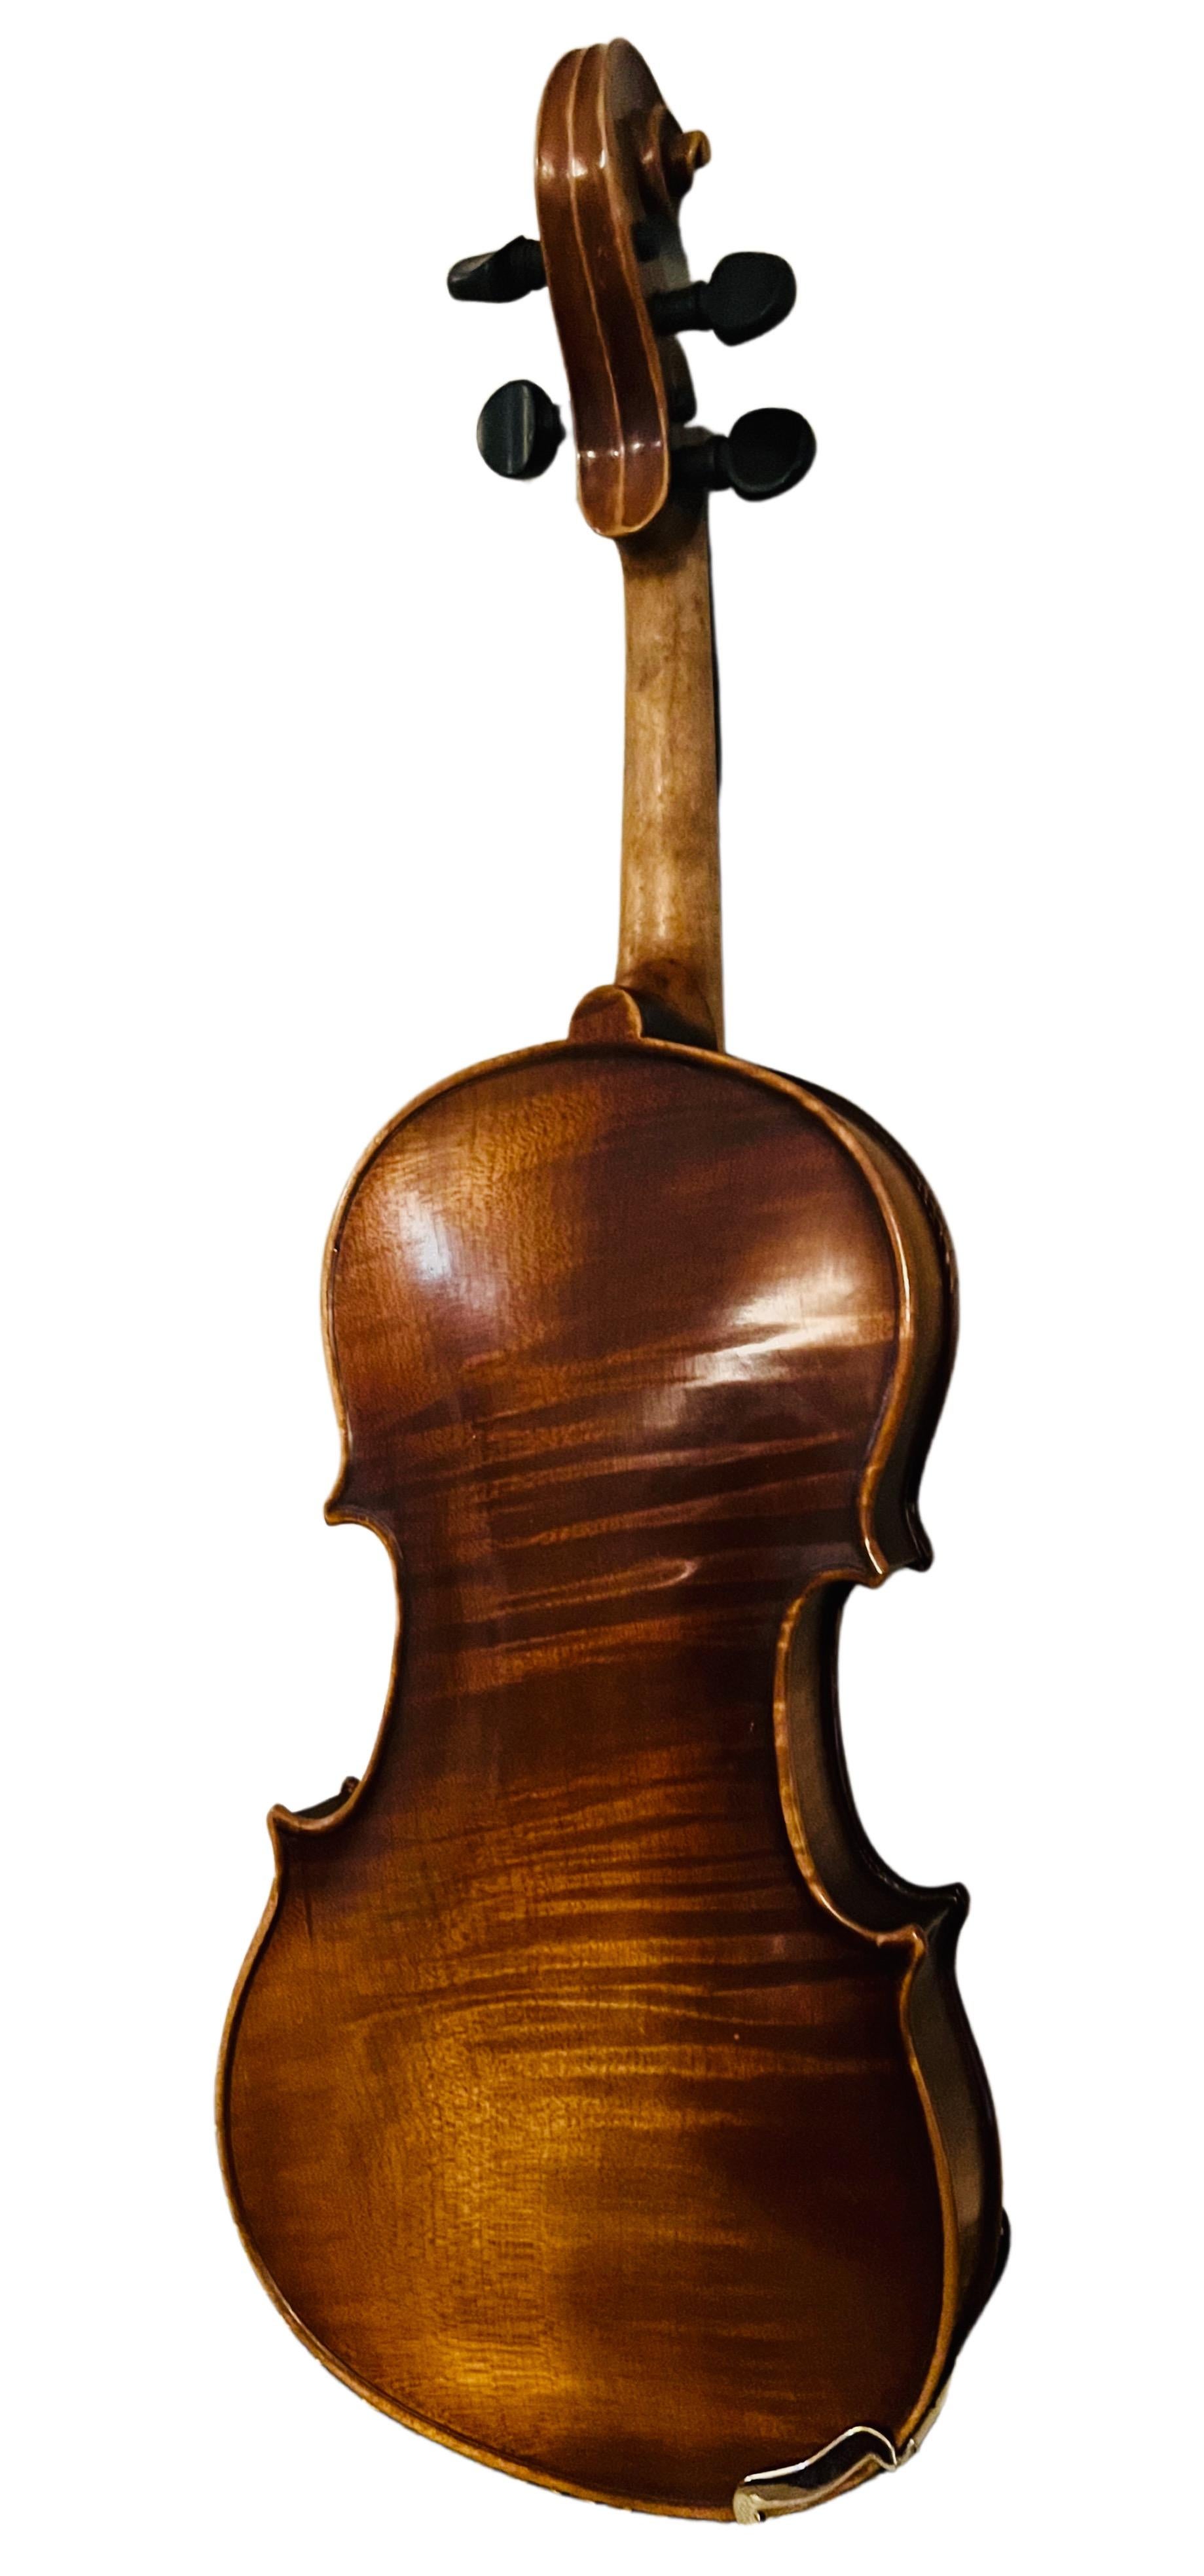 1970 3/4 E.R. Pfretzschner Hand-Crafted Violin in the Style of A. Stradivarius en vente 3